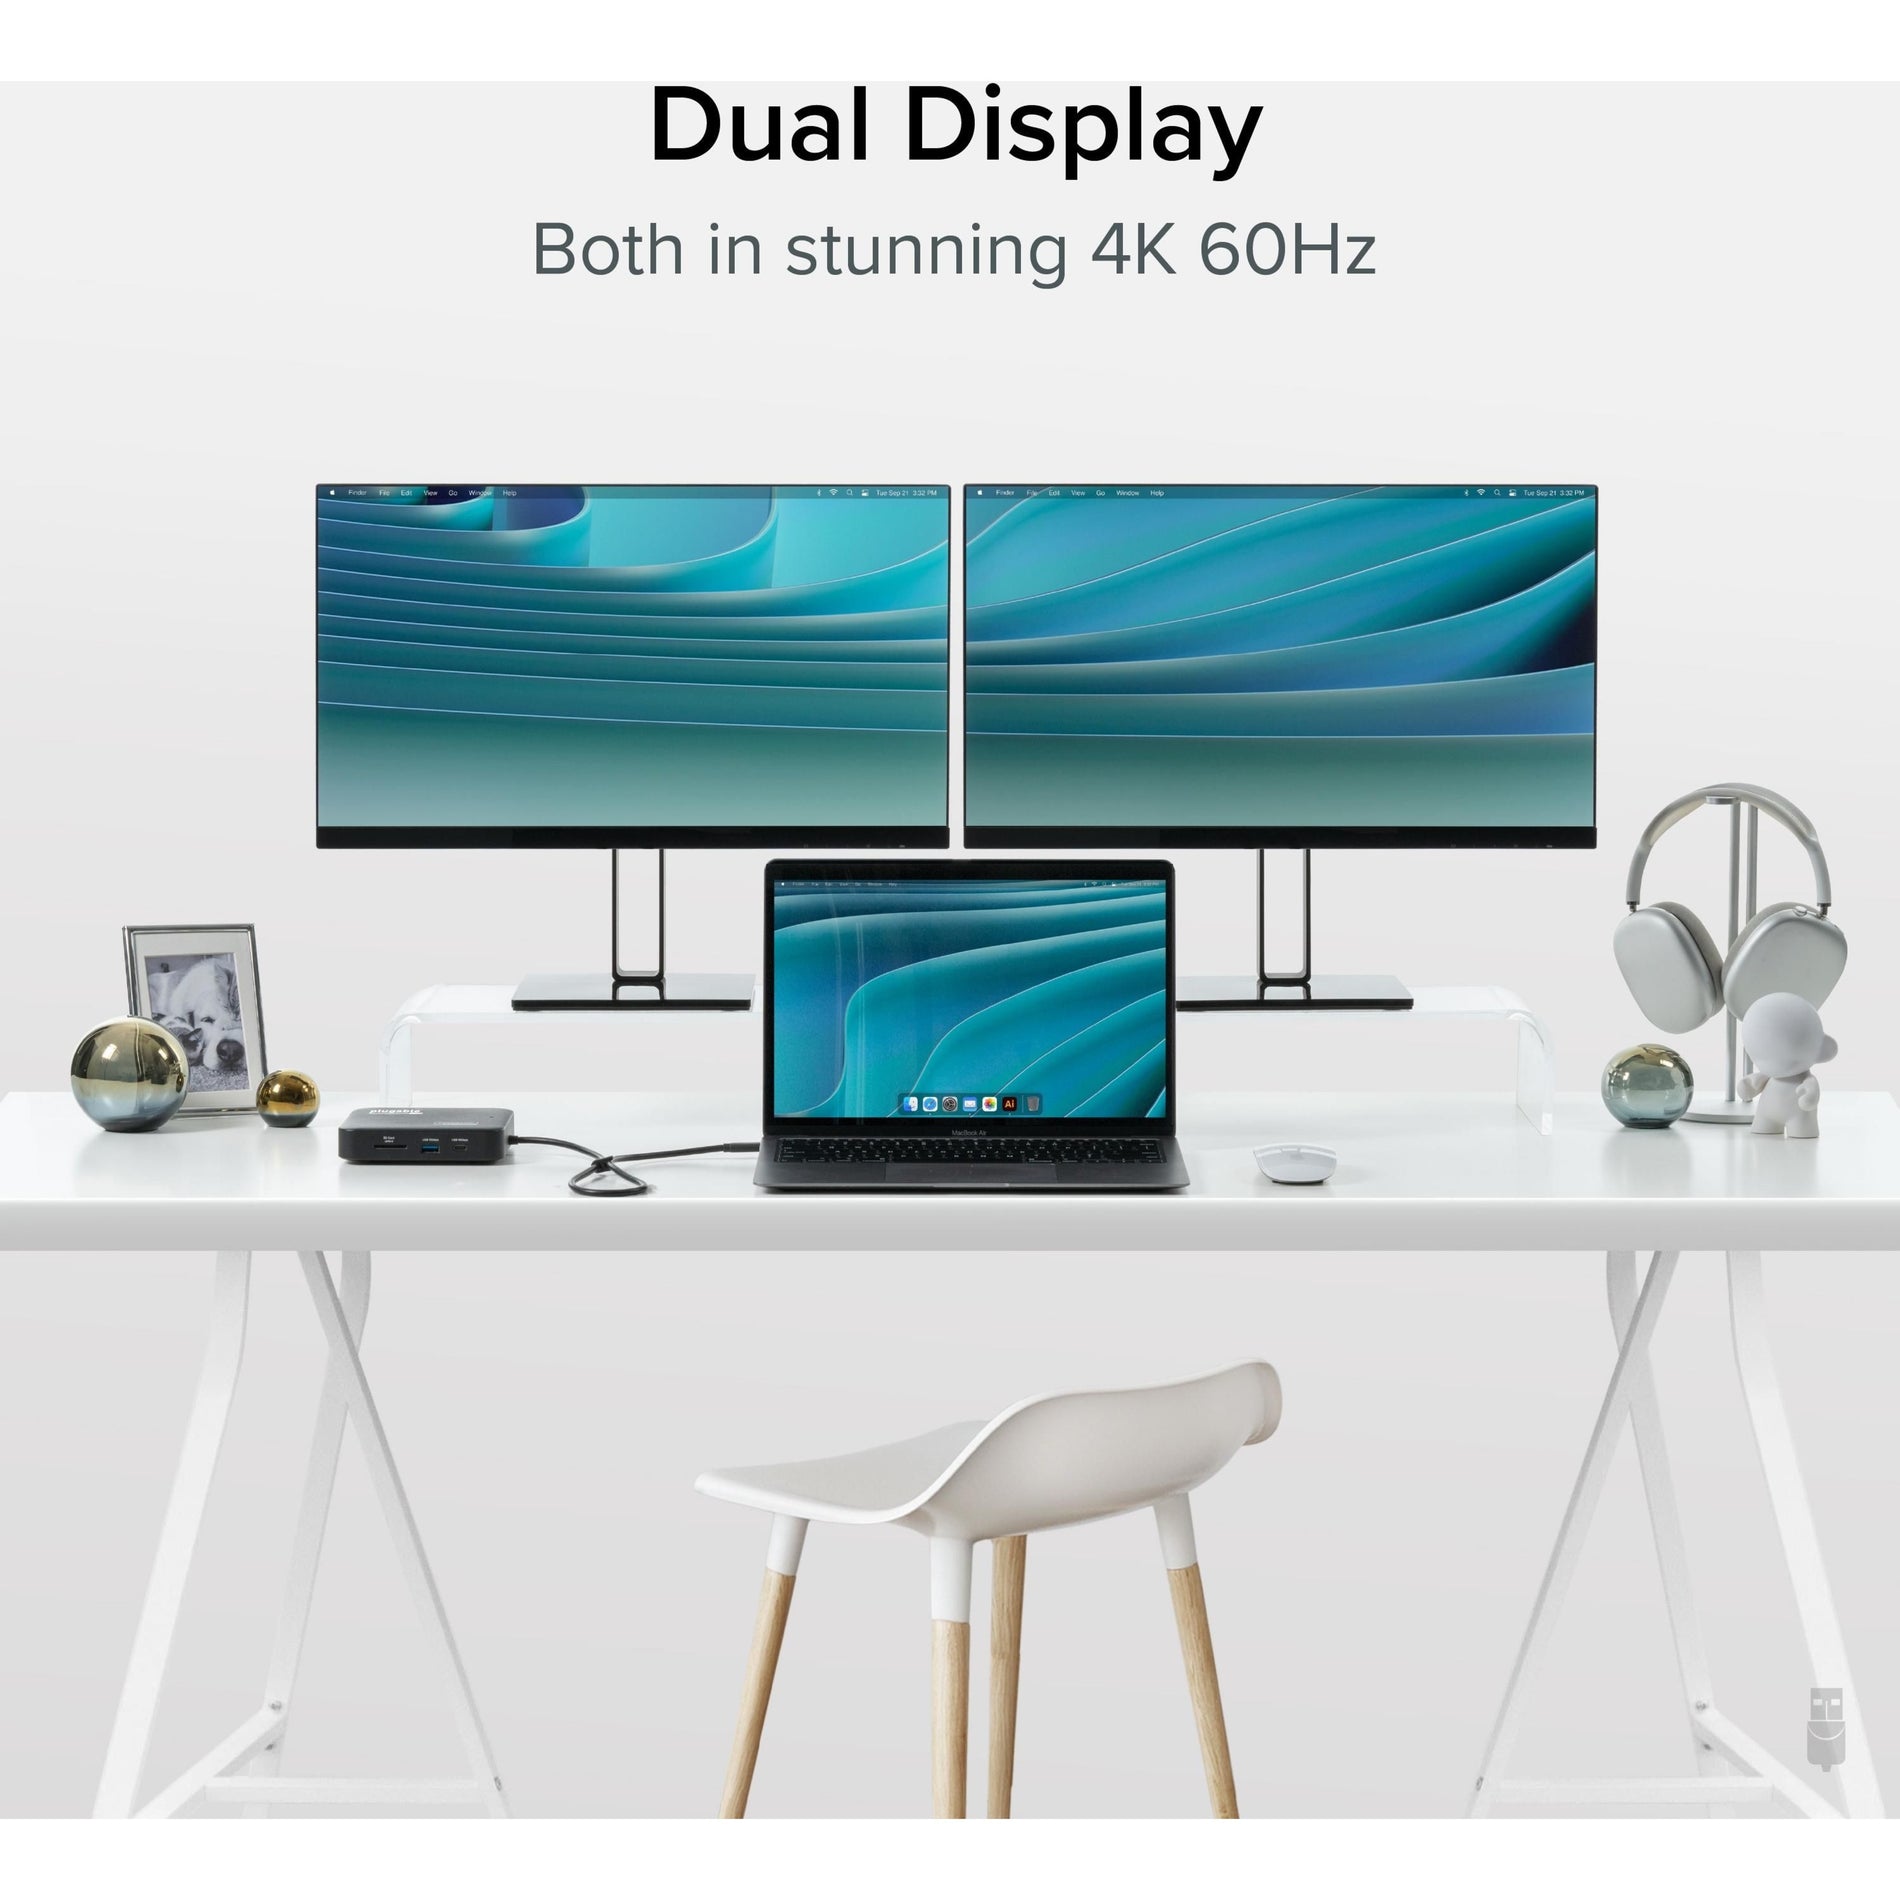 Plugable USBC-6950PDZ USB-C Dual HDMI Mini Docking Station, Extends to 4x Monitors, Compatible with Windows and Mac